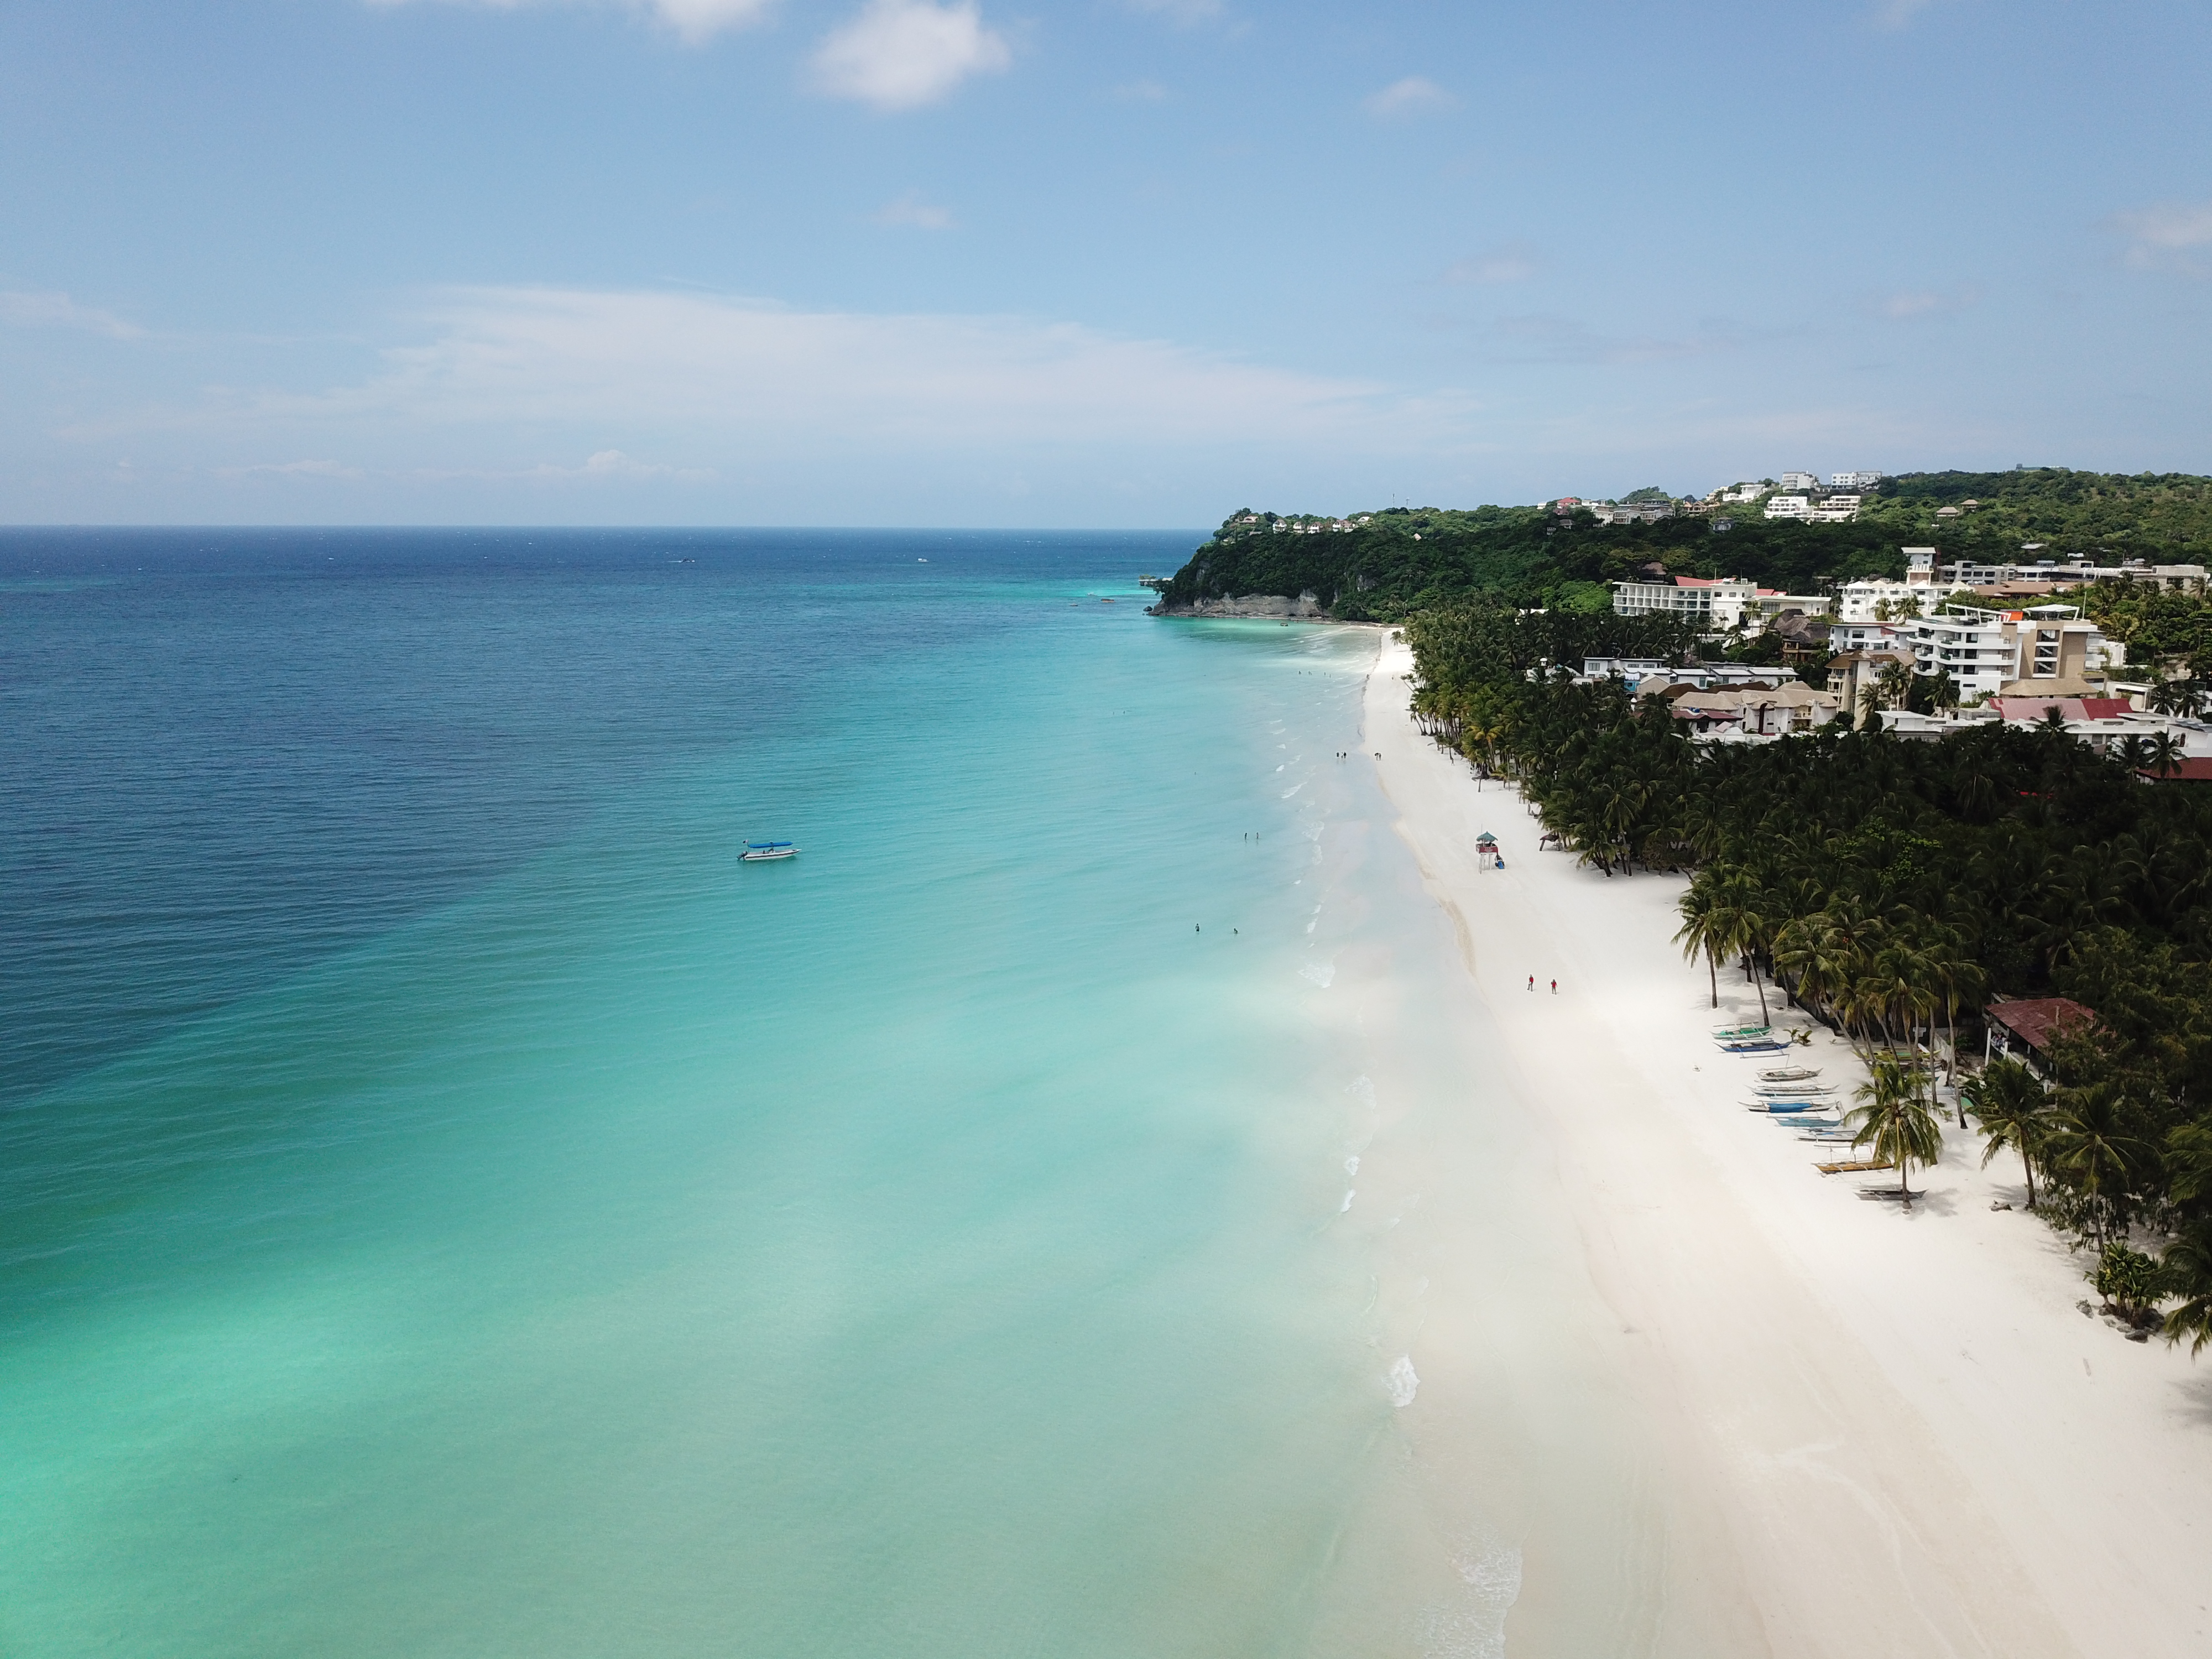 Boracay finally reopens for tourism on October 26, 2018 after six months of rehabilitation.